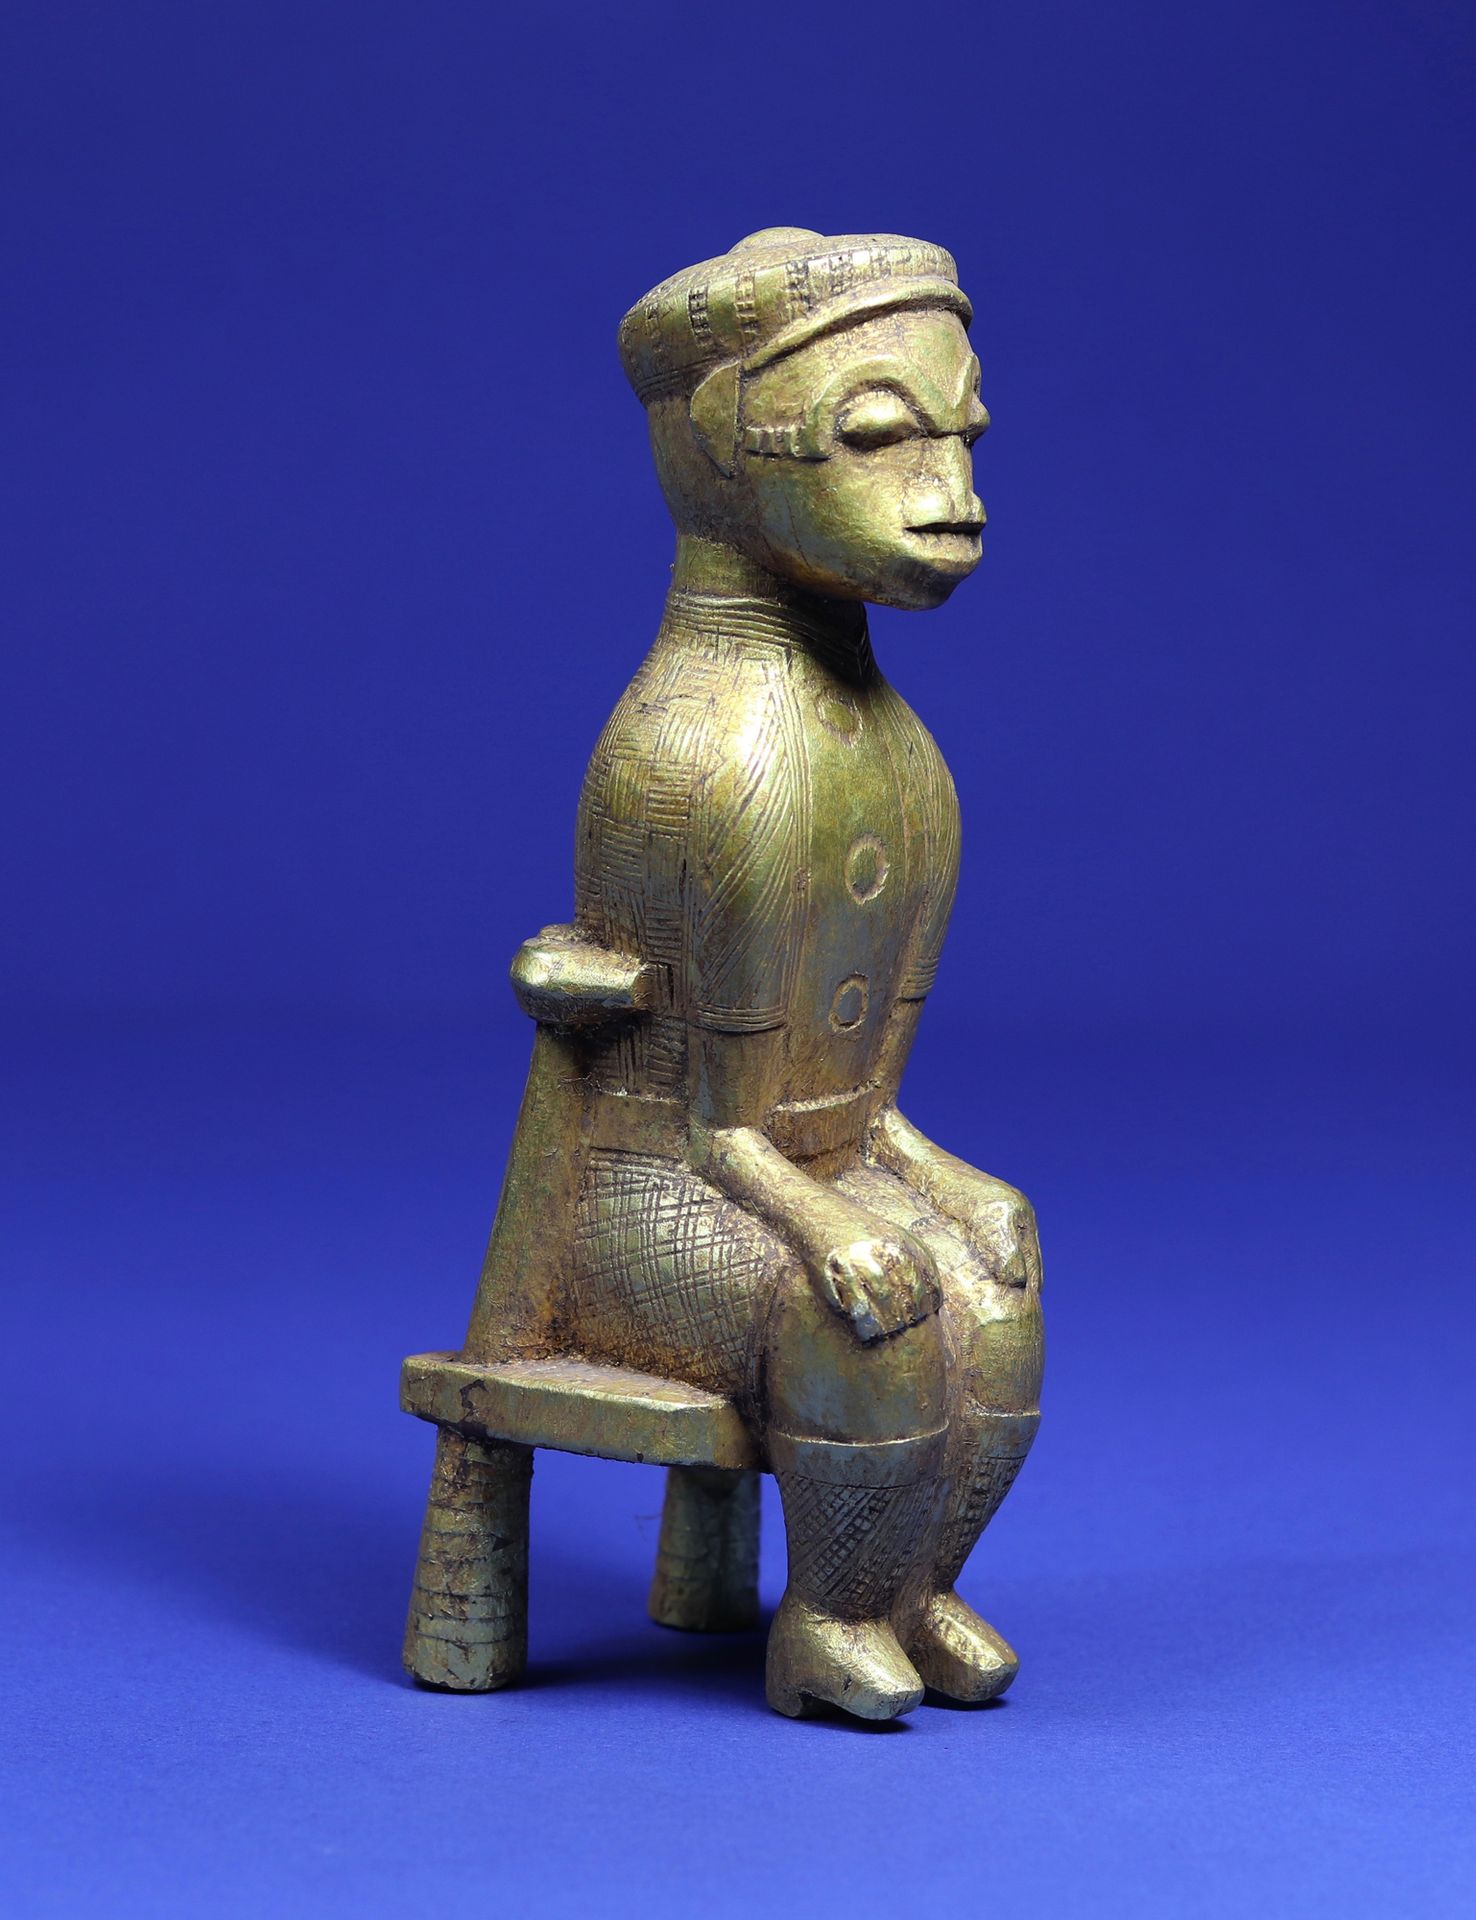 Null 
Statuette representing a character sitting on a chair, dressed in European&hellip;